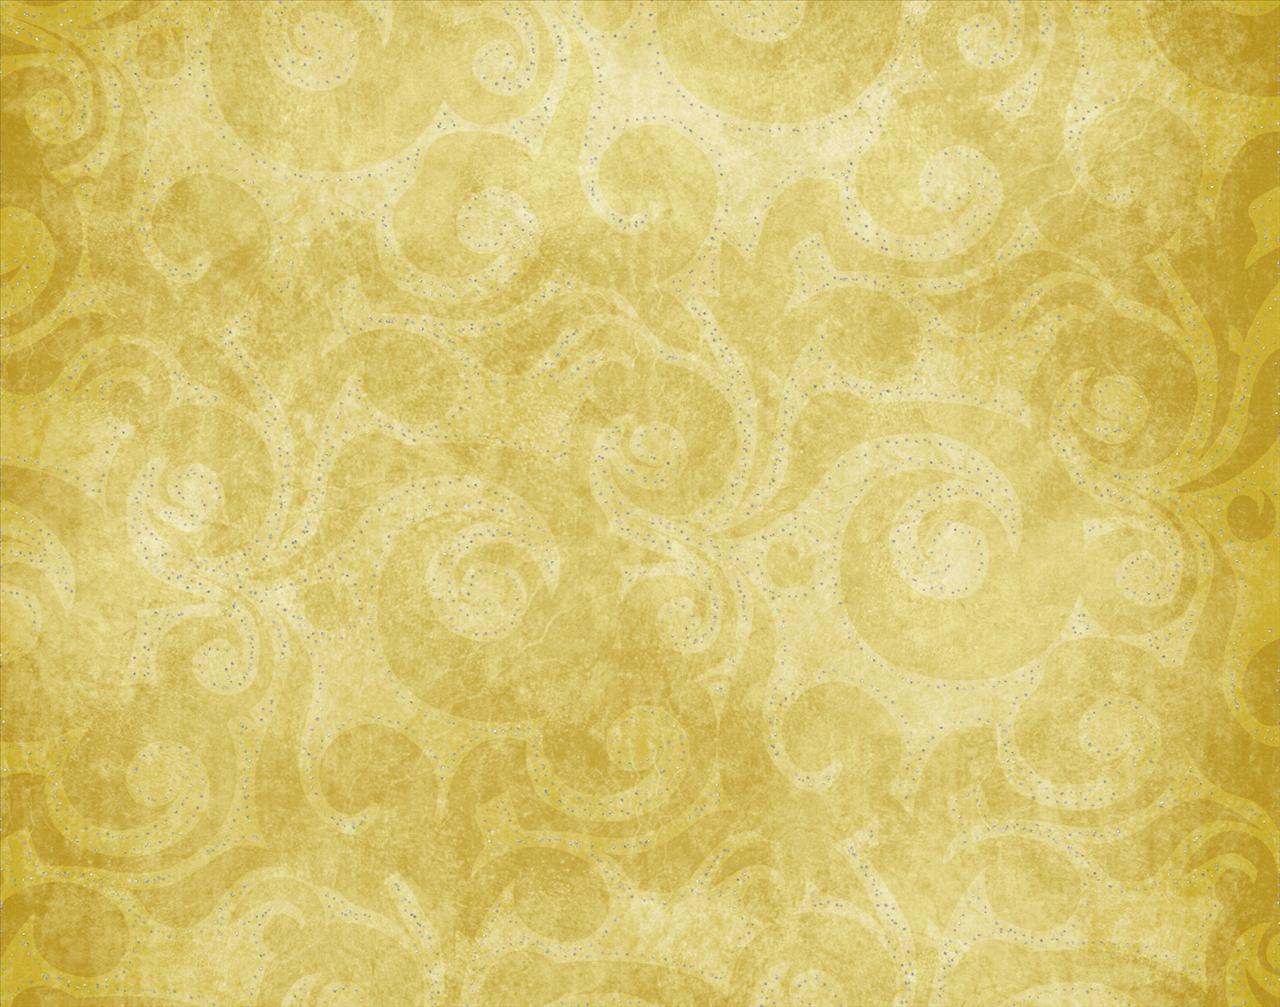 Free download Glowing Golden Background Wallpaper for PowerPoint ...